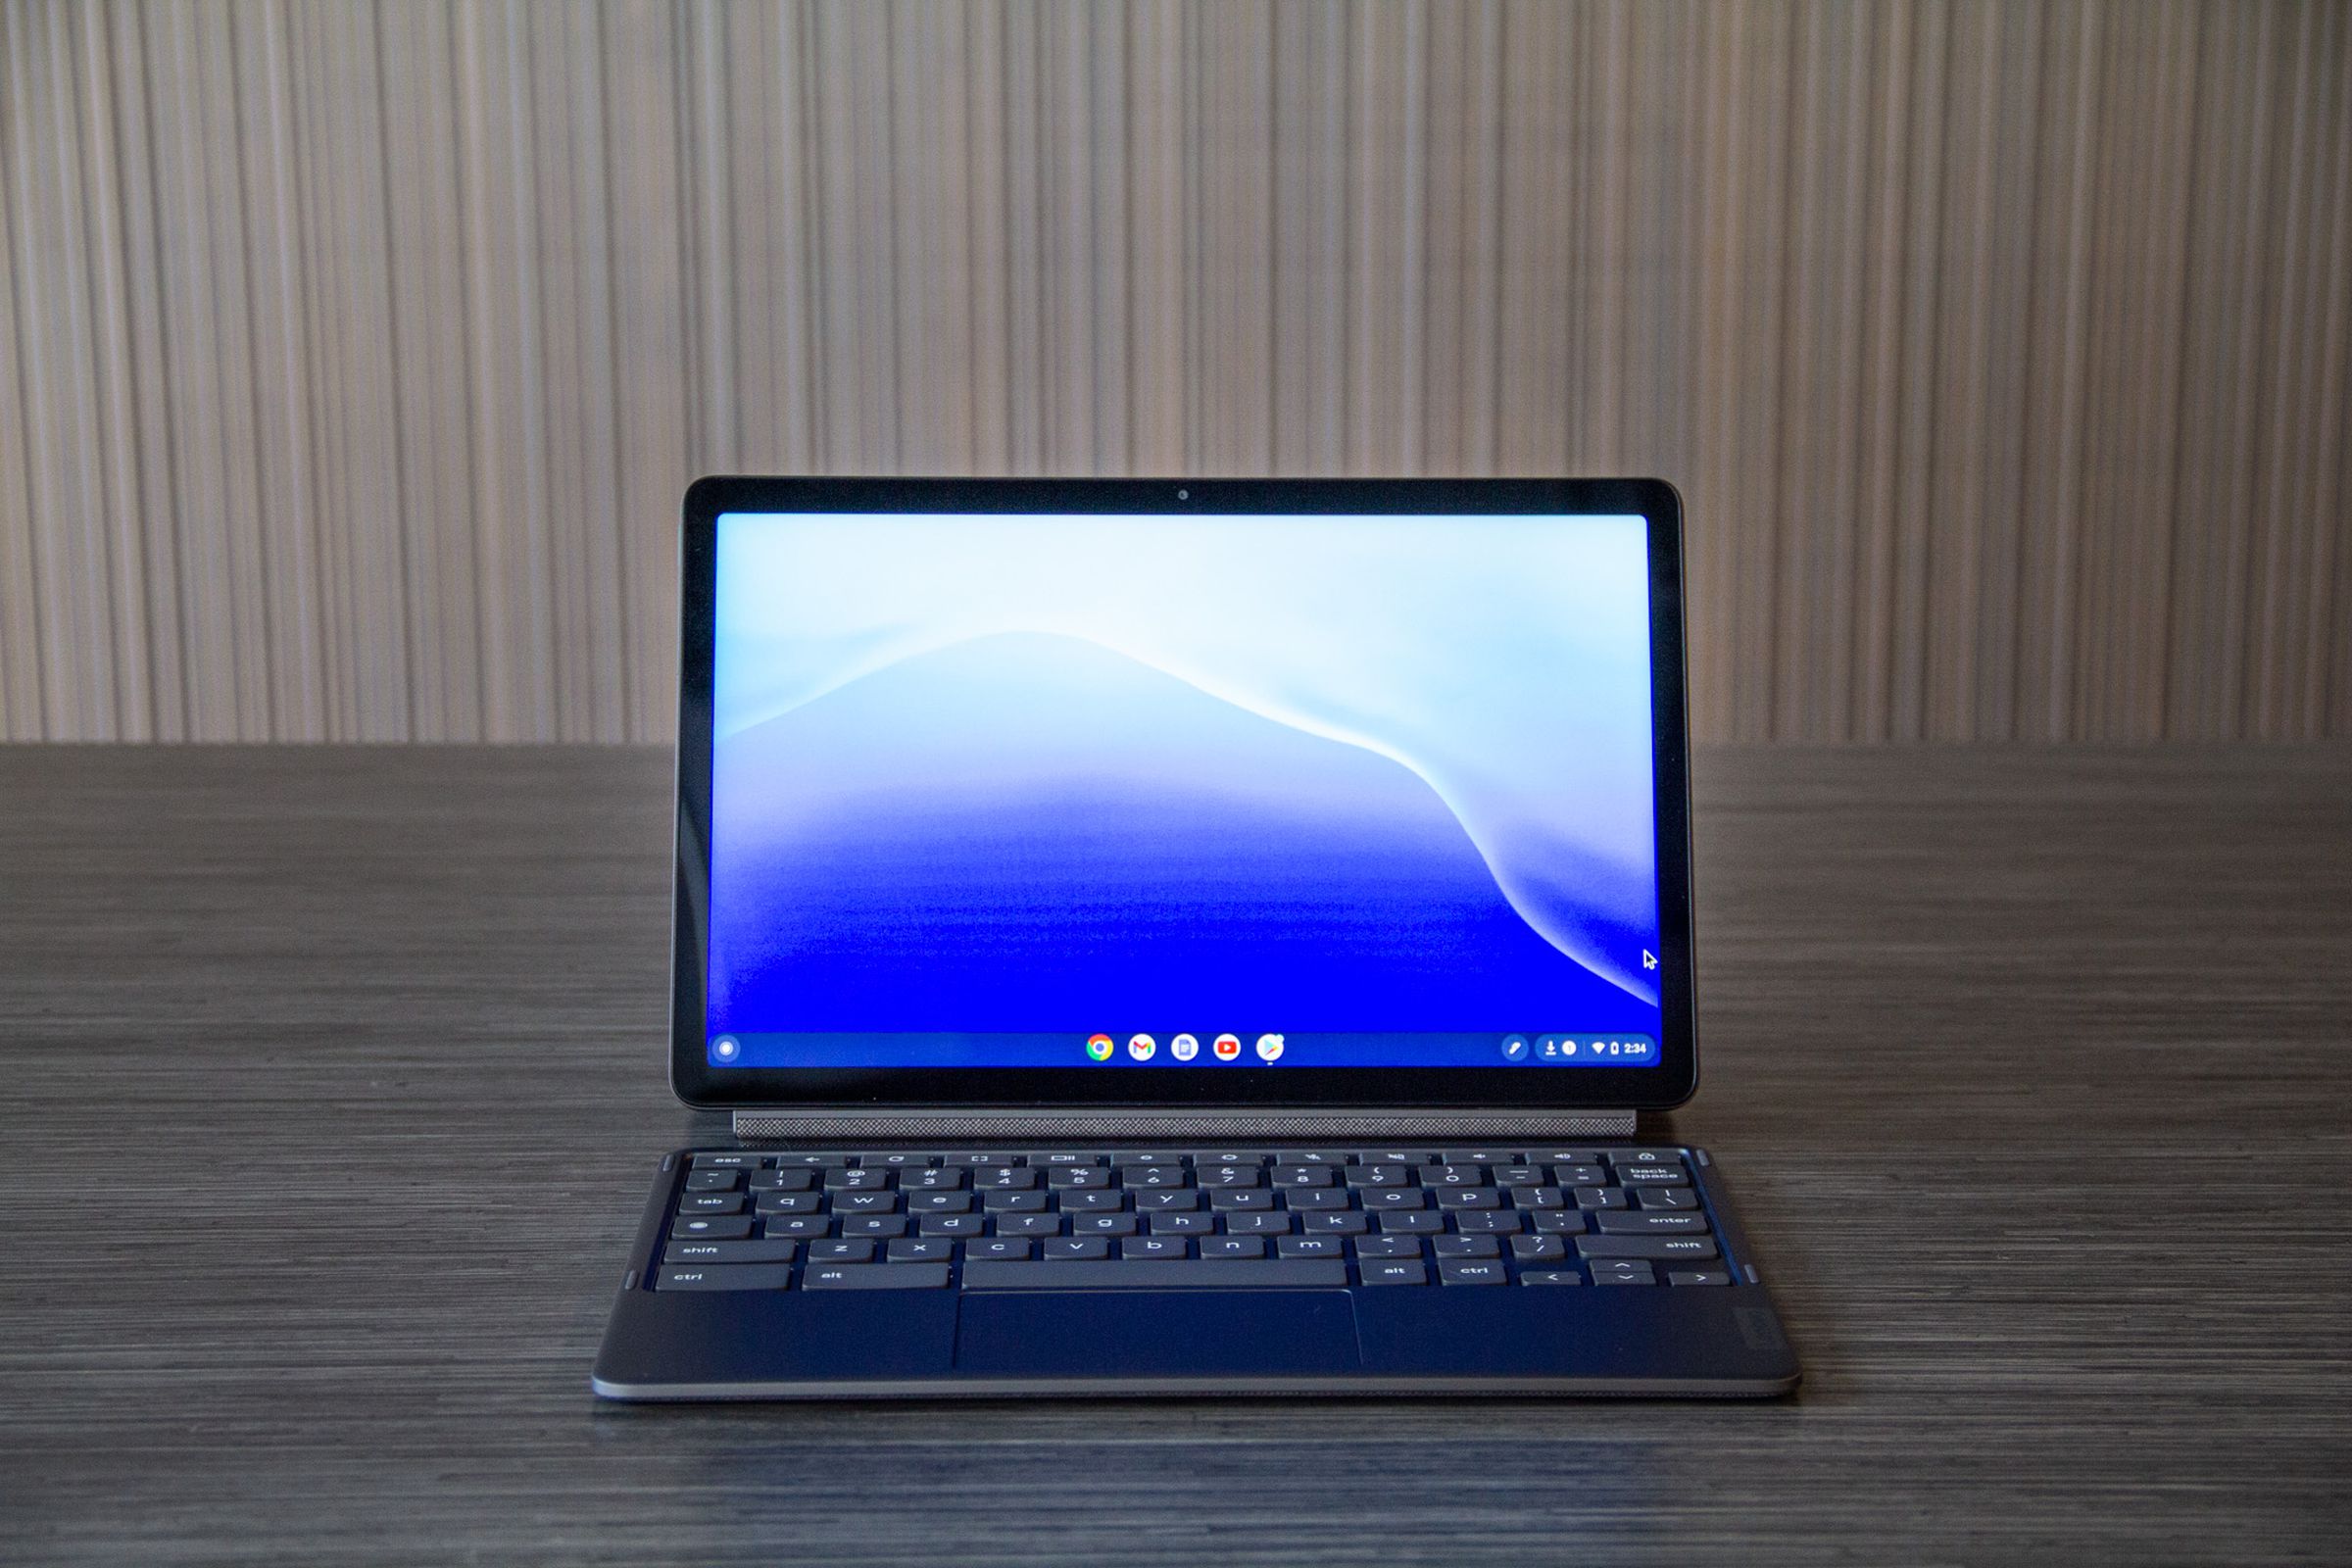 The Lenovo Chromebook Duet from the front in laptop mode. The screen displays a blue desktop background.